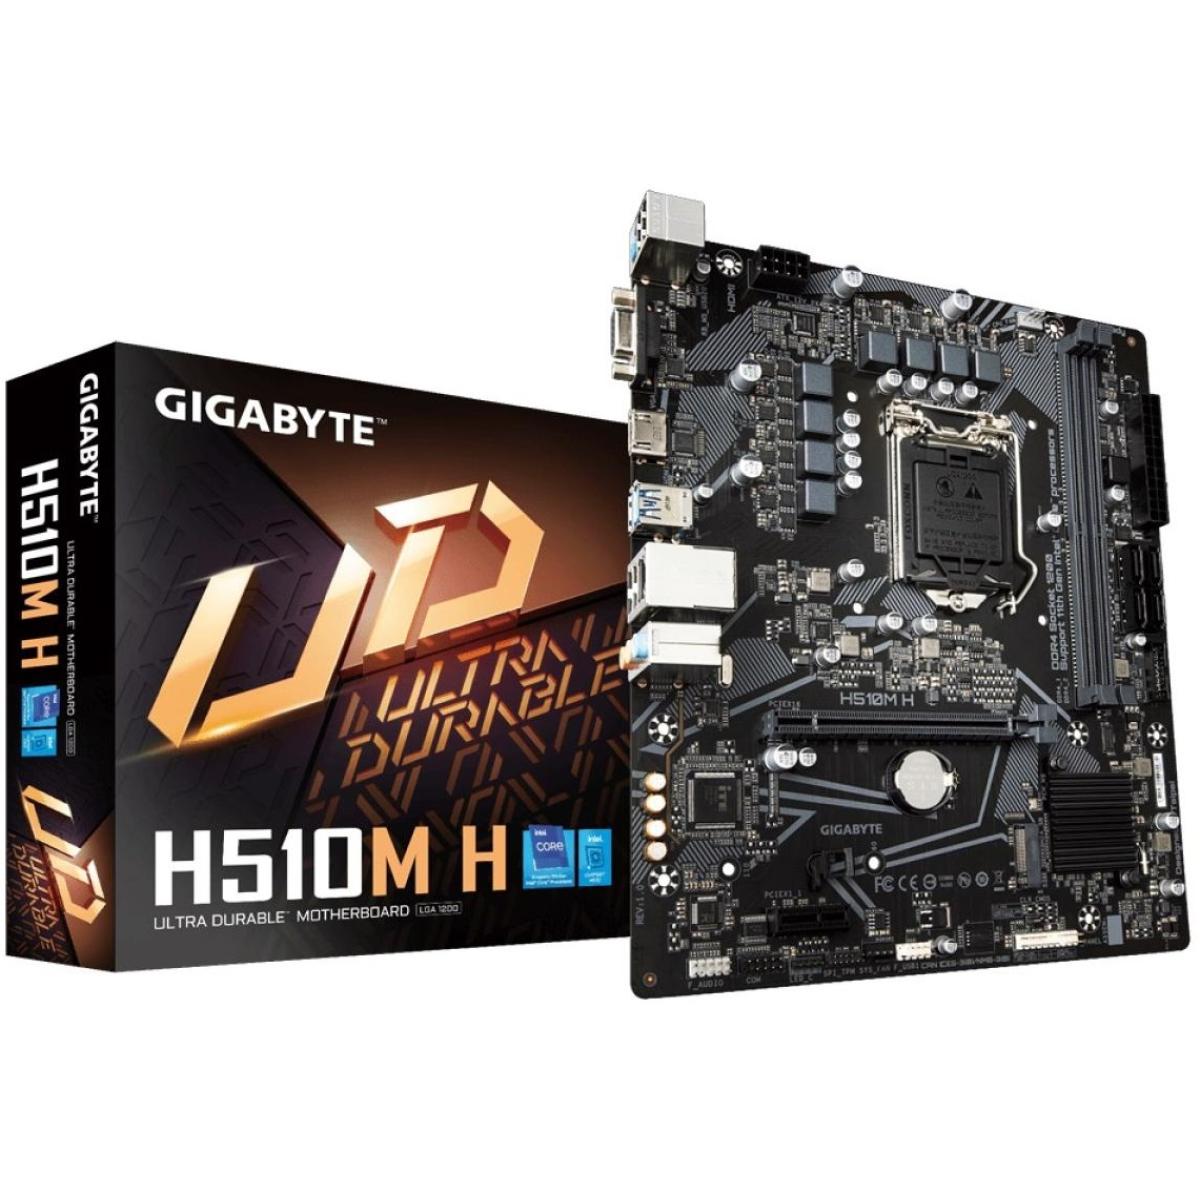 GIGABYTE H510M H Micro ATX with 6+2 Phases Digital VRM, PCIe 4.0* Motherboard